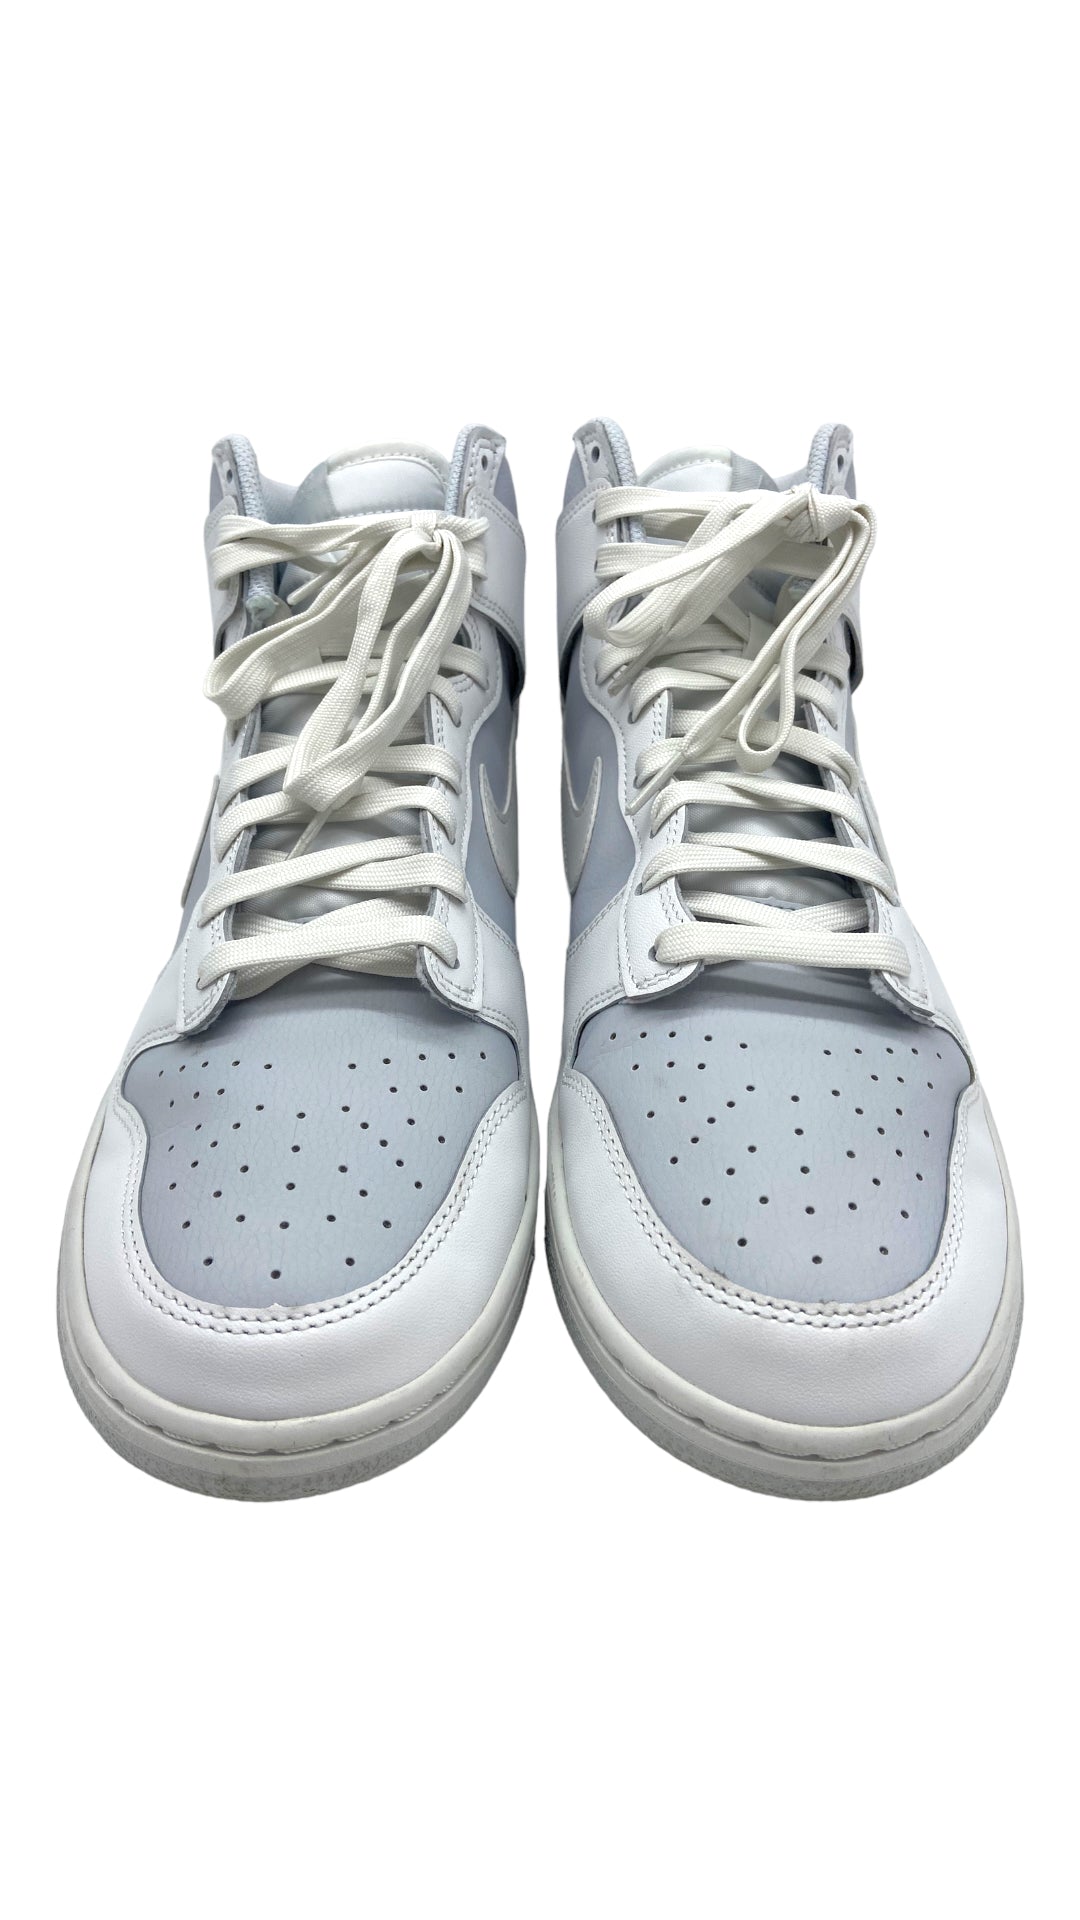 Load image into Gallery viewer, Preowned Nike Dunk High Summit White Pure Platinum Sz 12.5
